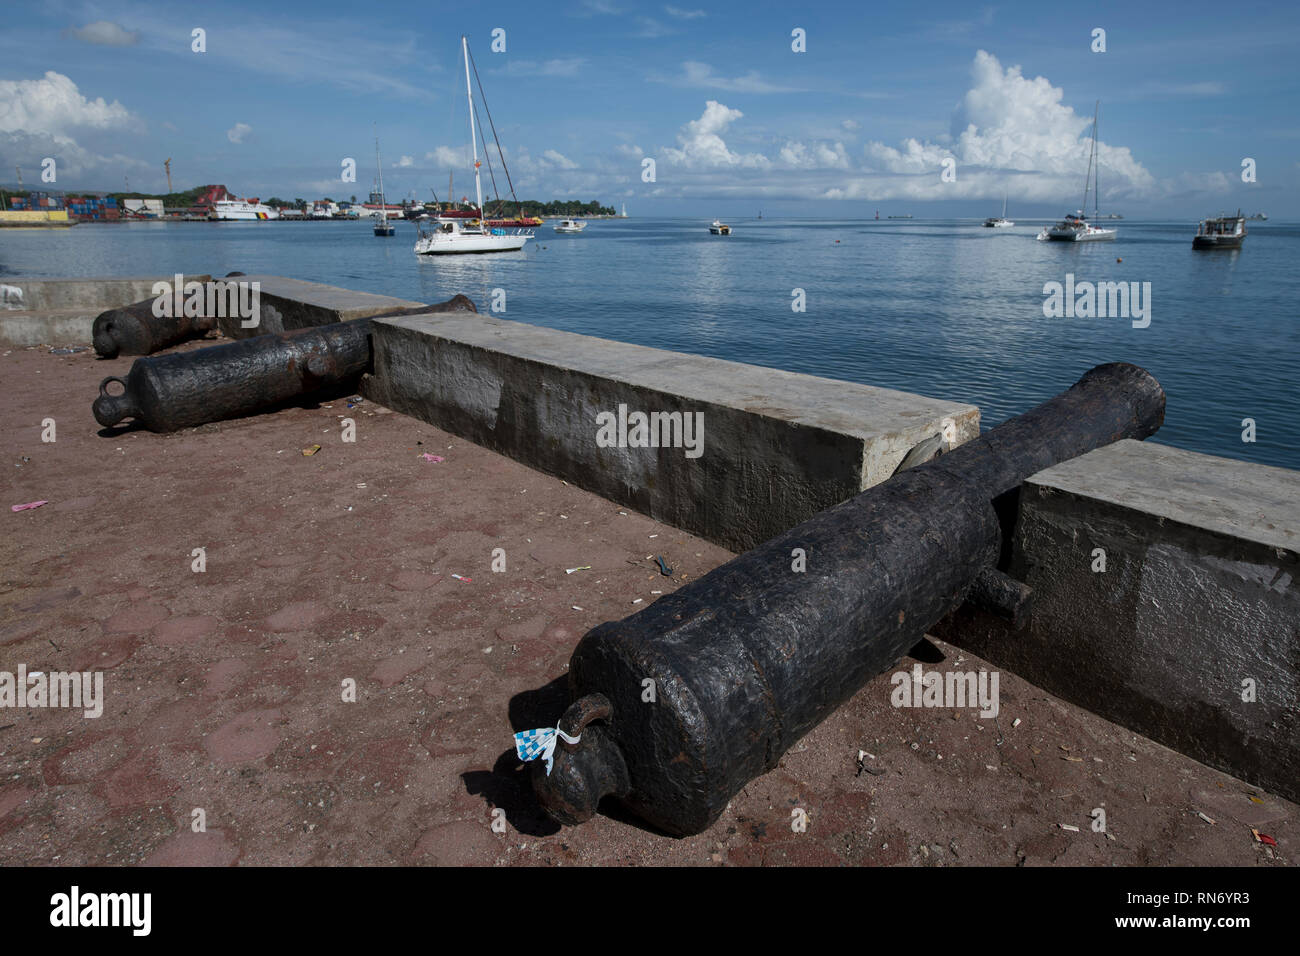 Cannon, Portuguese cannons facing out to sea, Dili, East Timor Stock Photo